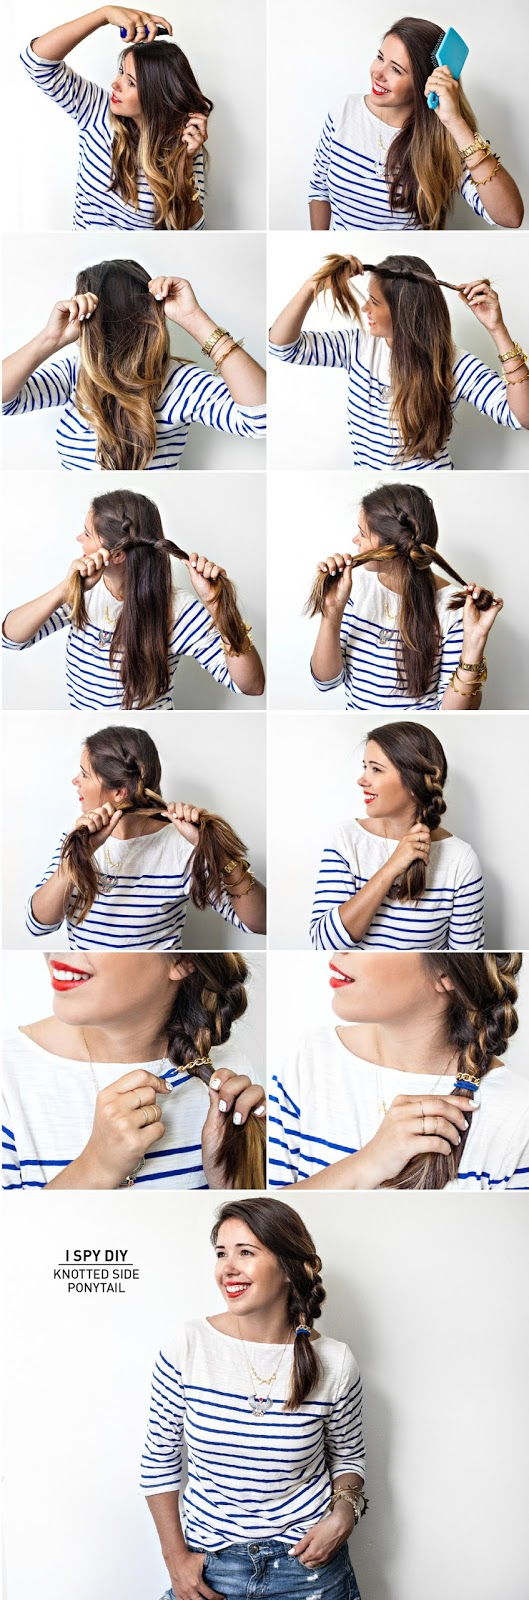 Knotted Side Ponytail